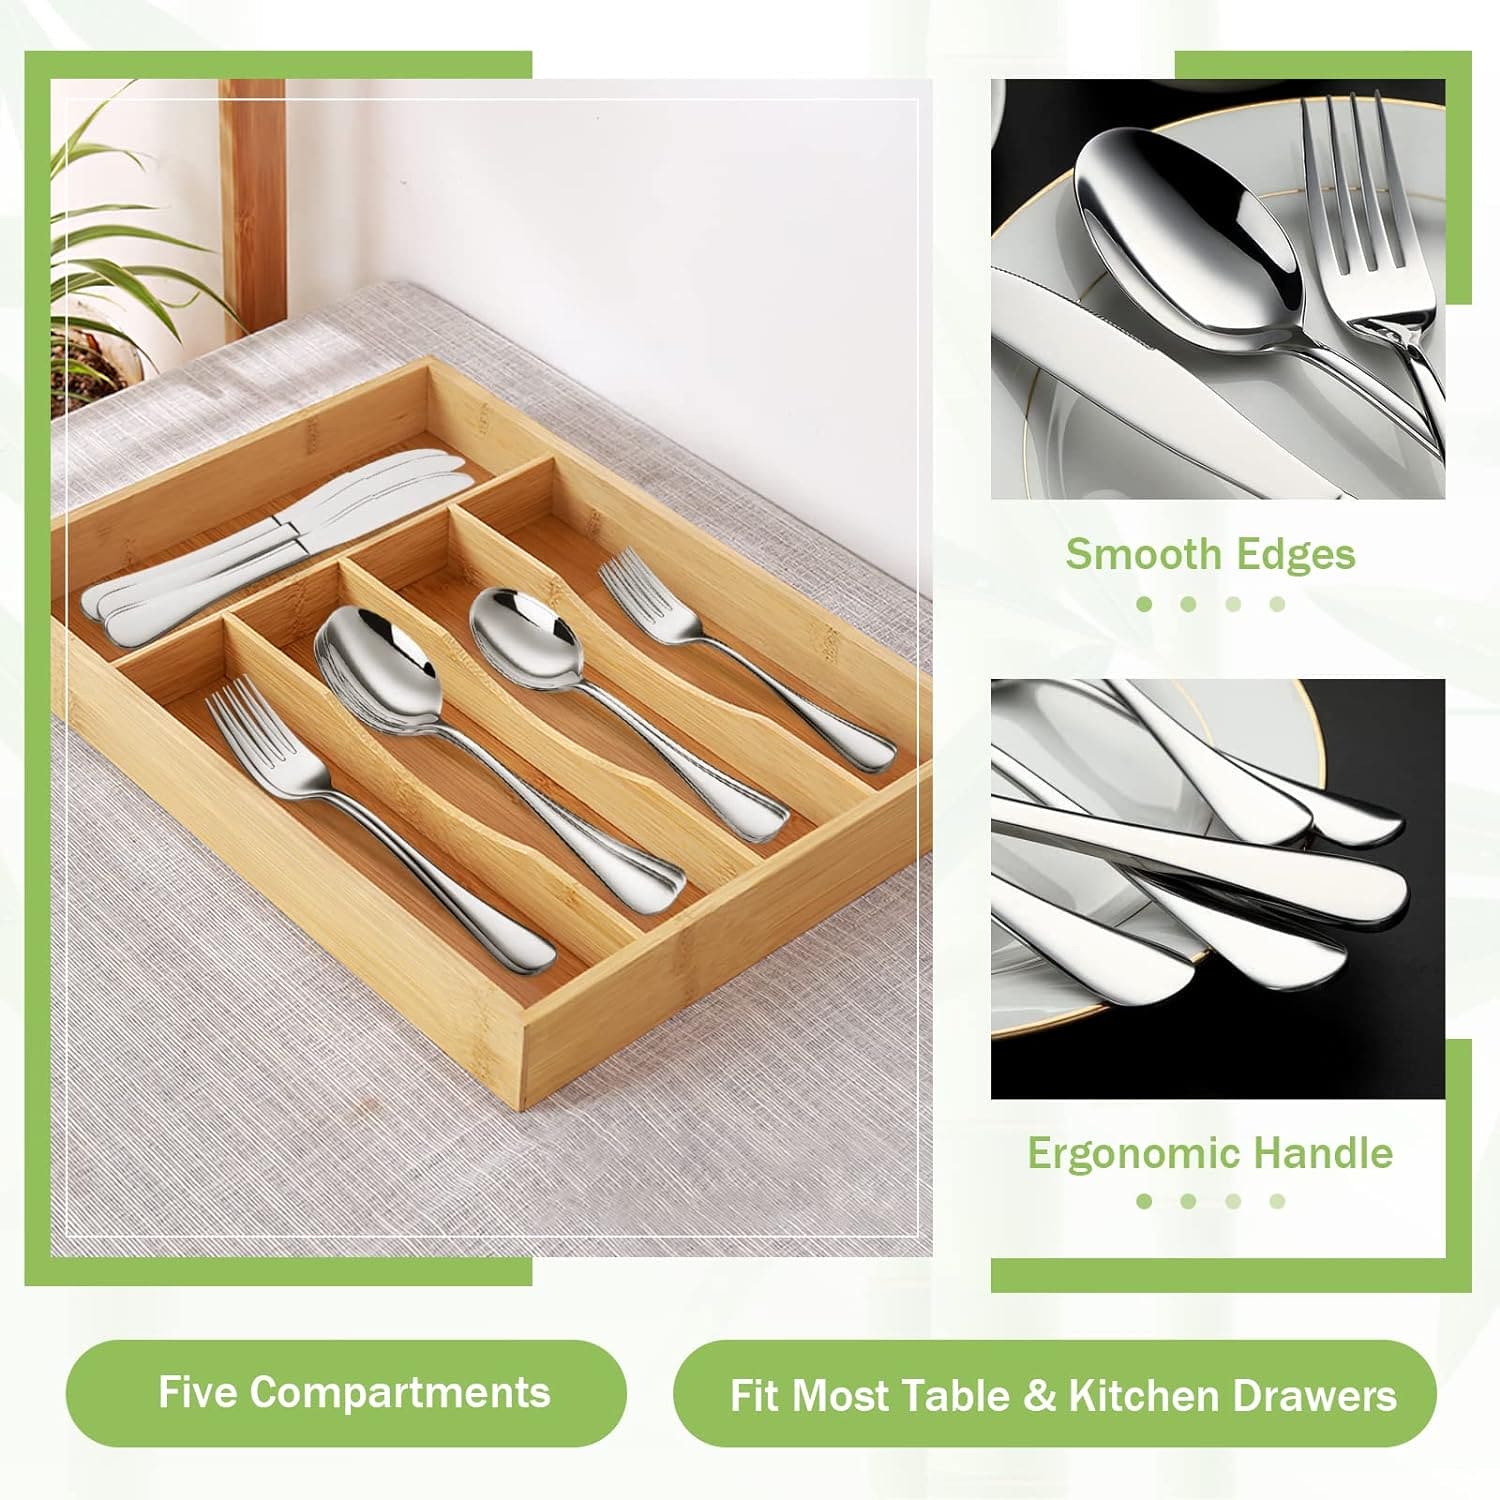 5 Compartment Bamboo Cutlery Tray, Kitchen Drawer Utensils Holder, Wooden Knife Fork Spoon Organizer Case, Bulk Bamboo Cutlery Tray, Drawer Multi Compartment Flatware Tray